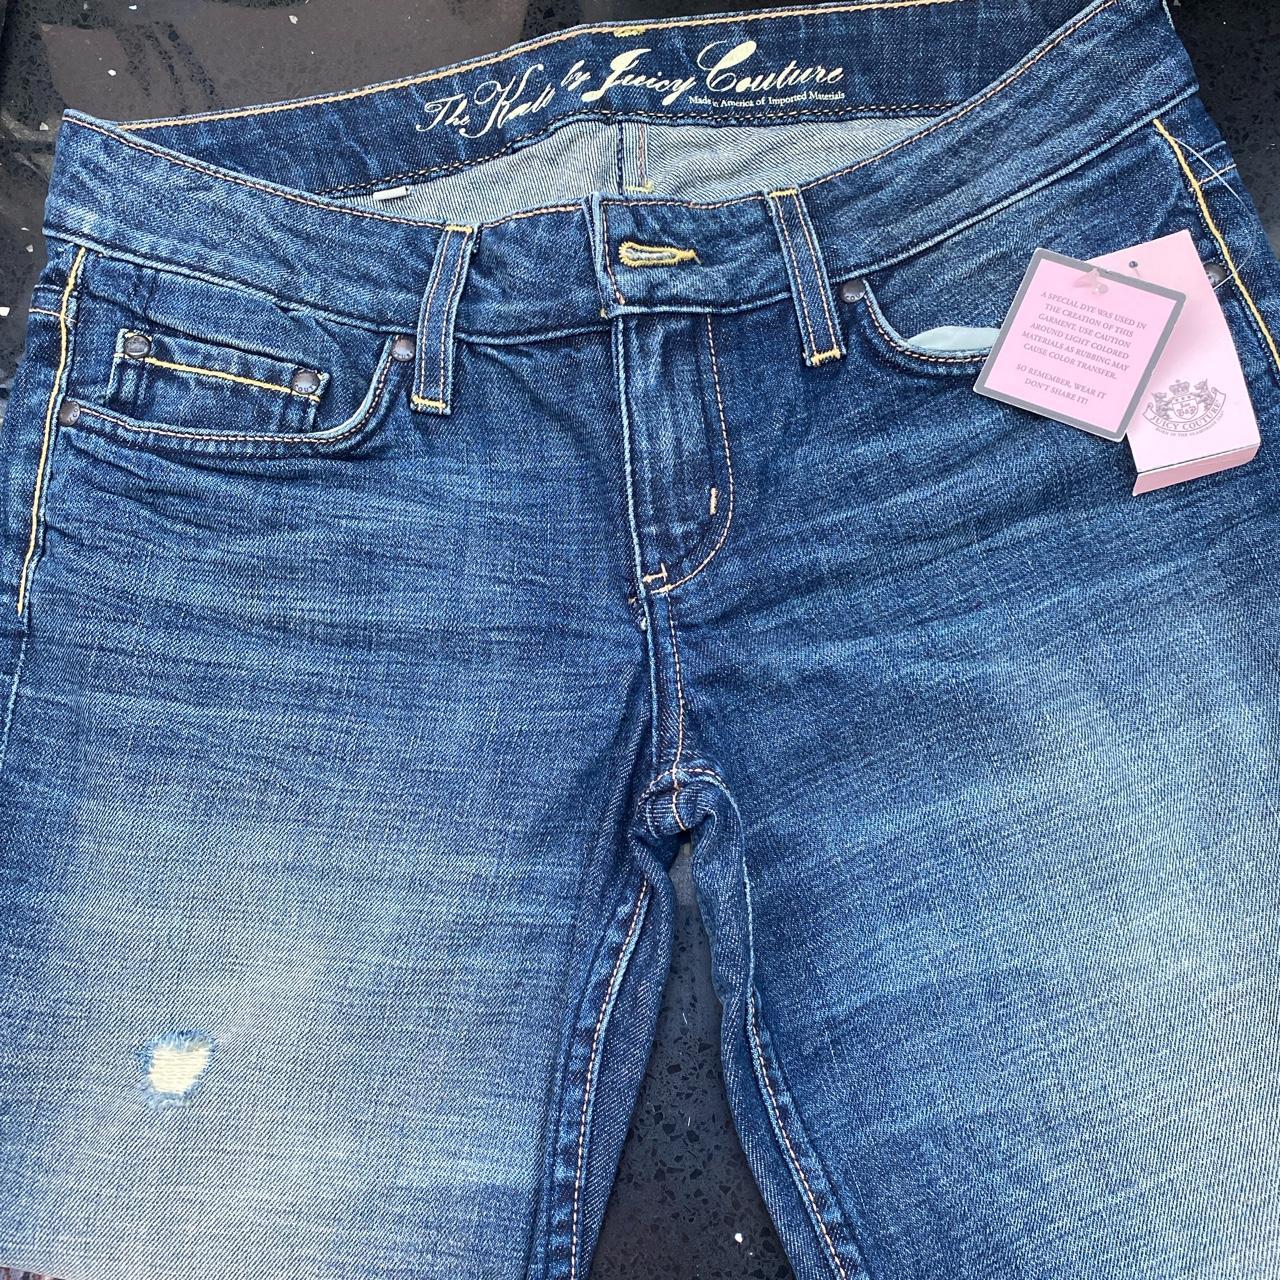 Brand new with labels Juicy Couture jeans Size... - Depop